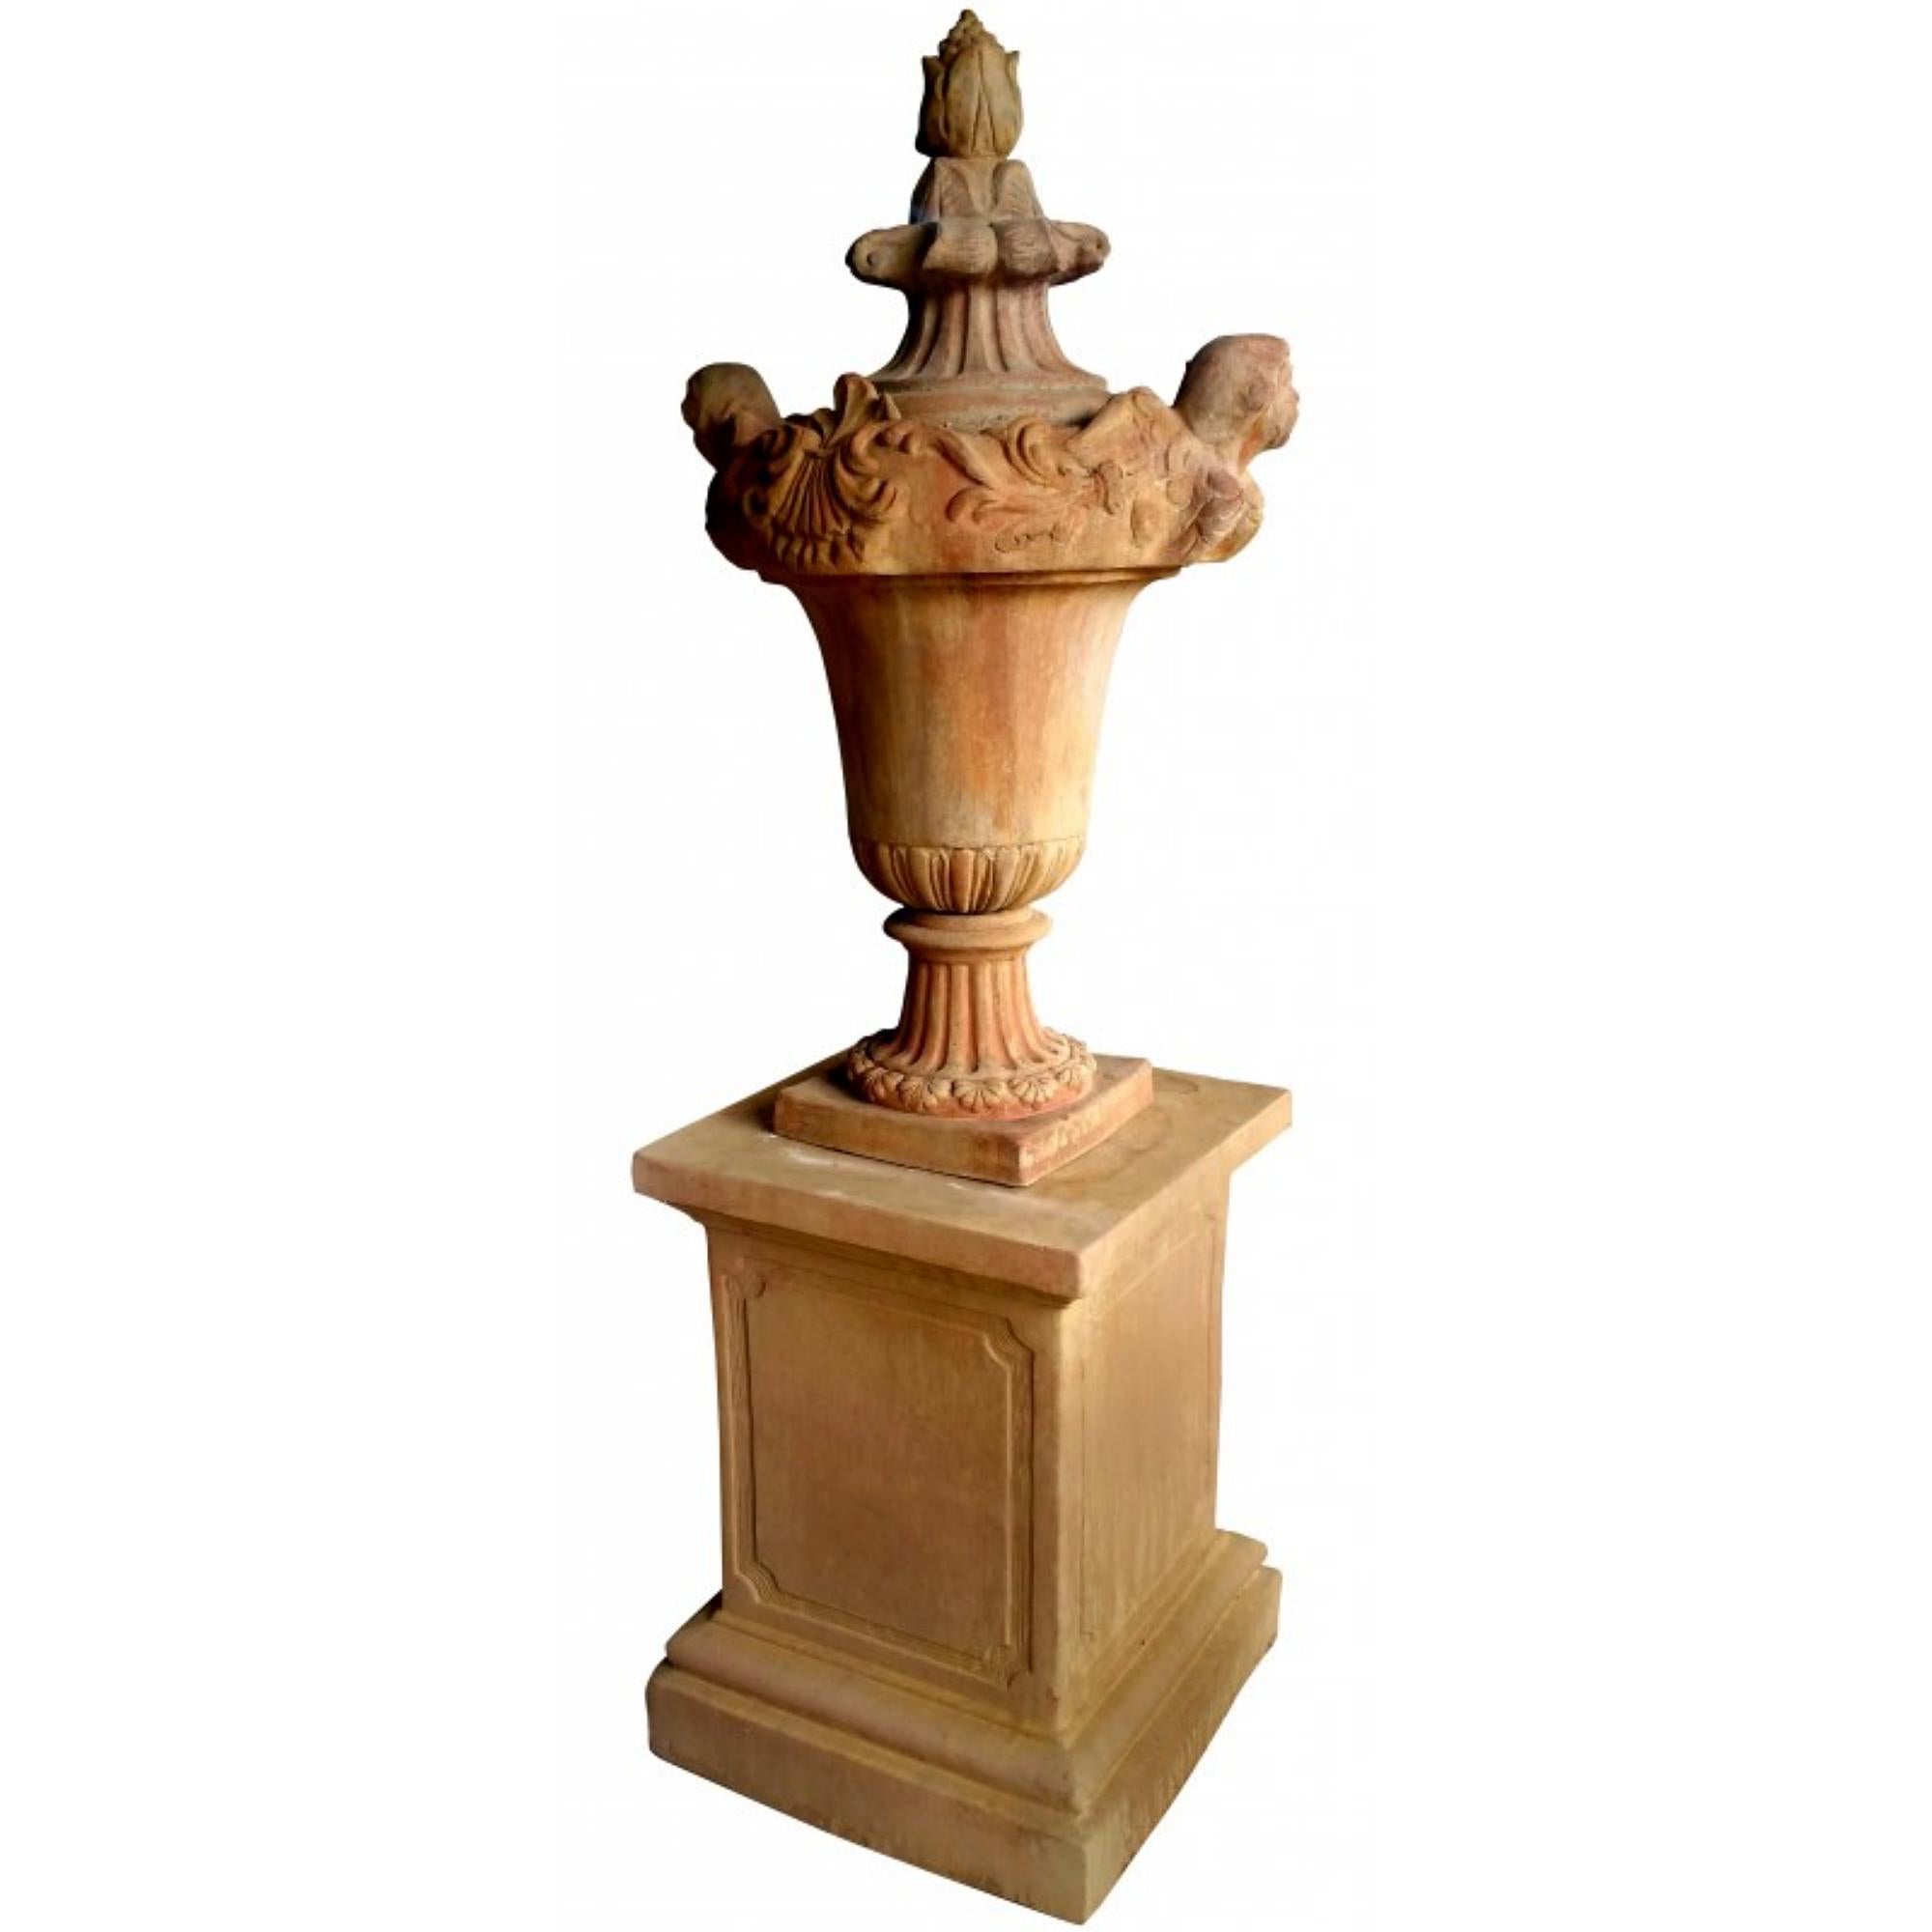 Hand-Crafted Gate Vase with Two Front Putti, Tuscan Renaissance, Early 20th Century For Sale